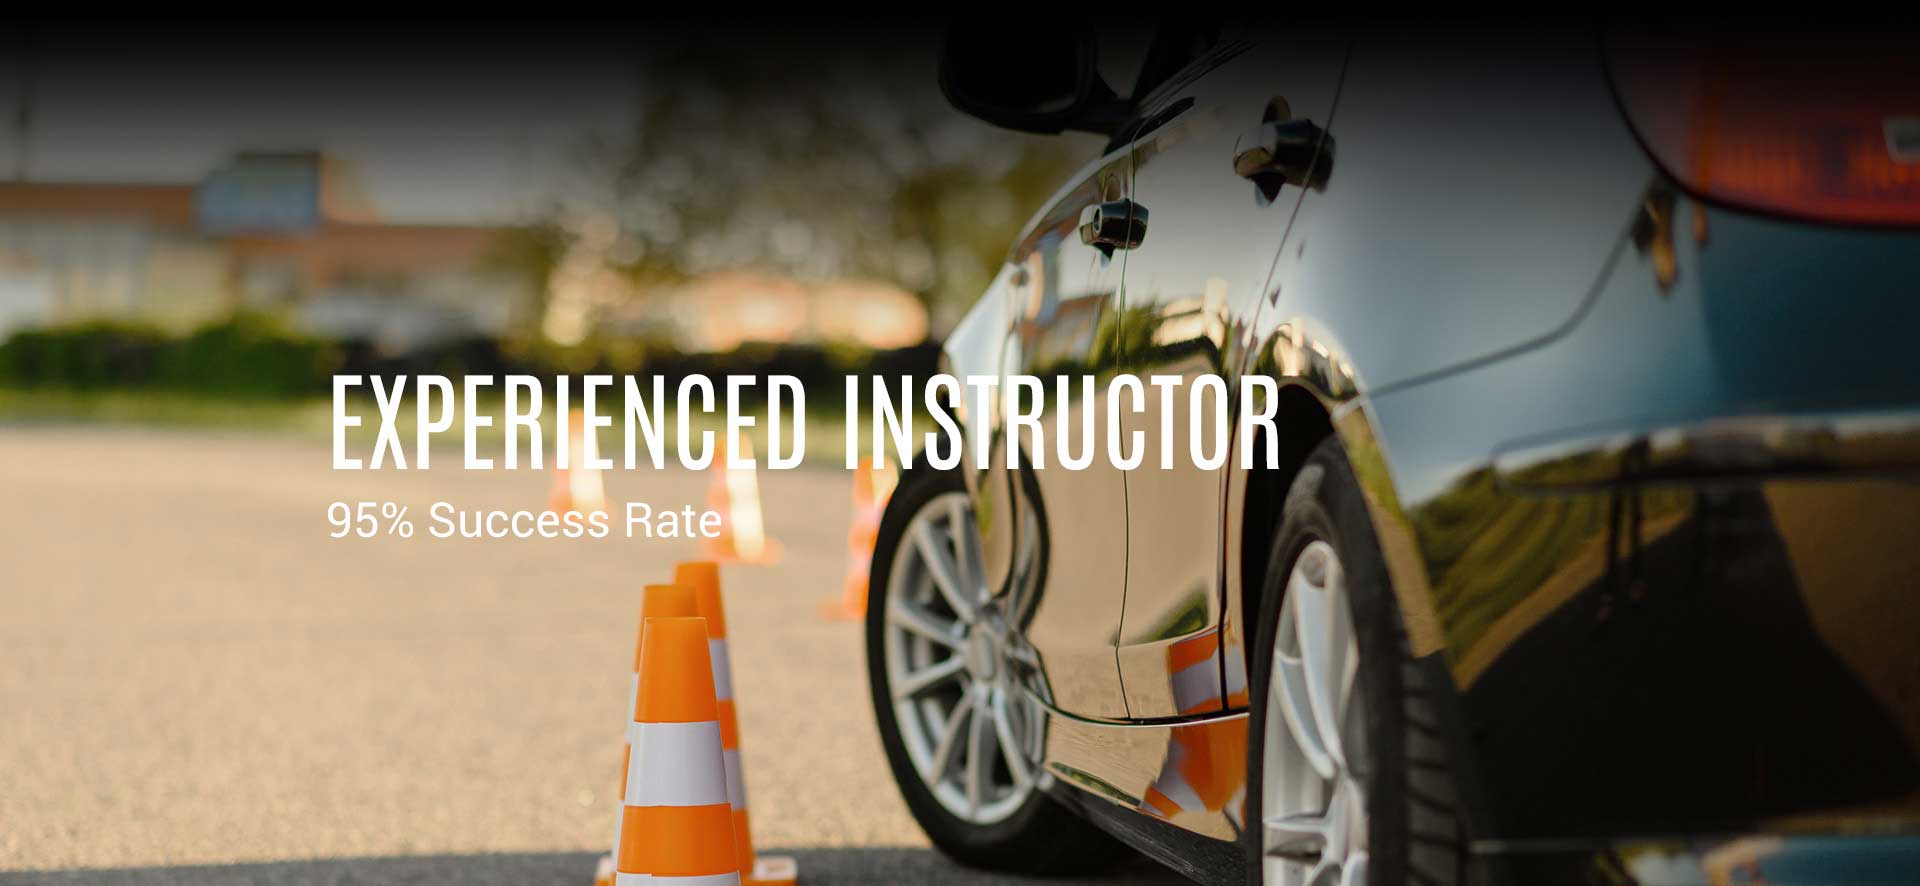 Experienced Instructor